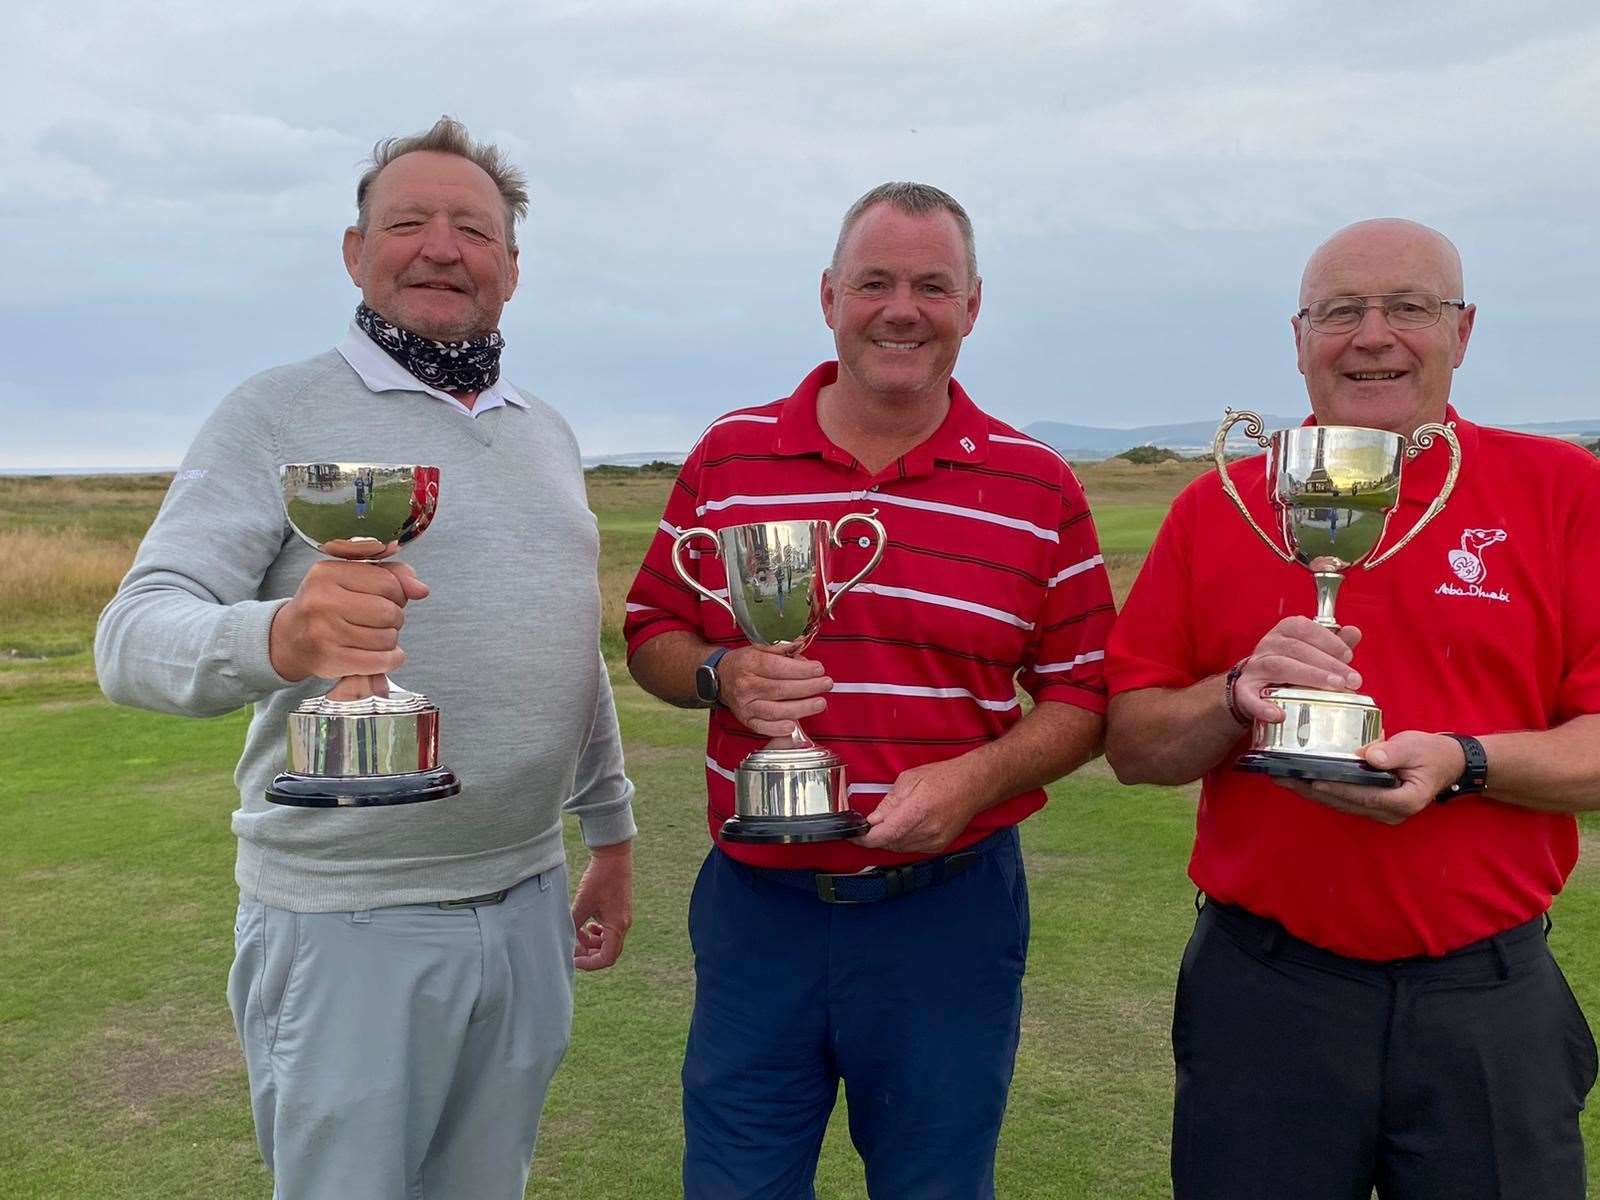 Celebrating their victories are trophy winners (from left) Alf Bryce-Maynard, Richard Cormack and Dougie Cruickshank. Picture: Spey Bay Golf Club